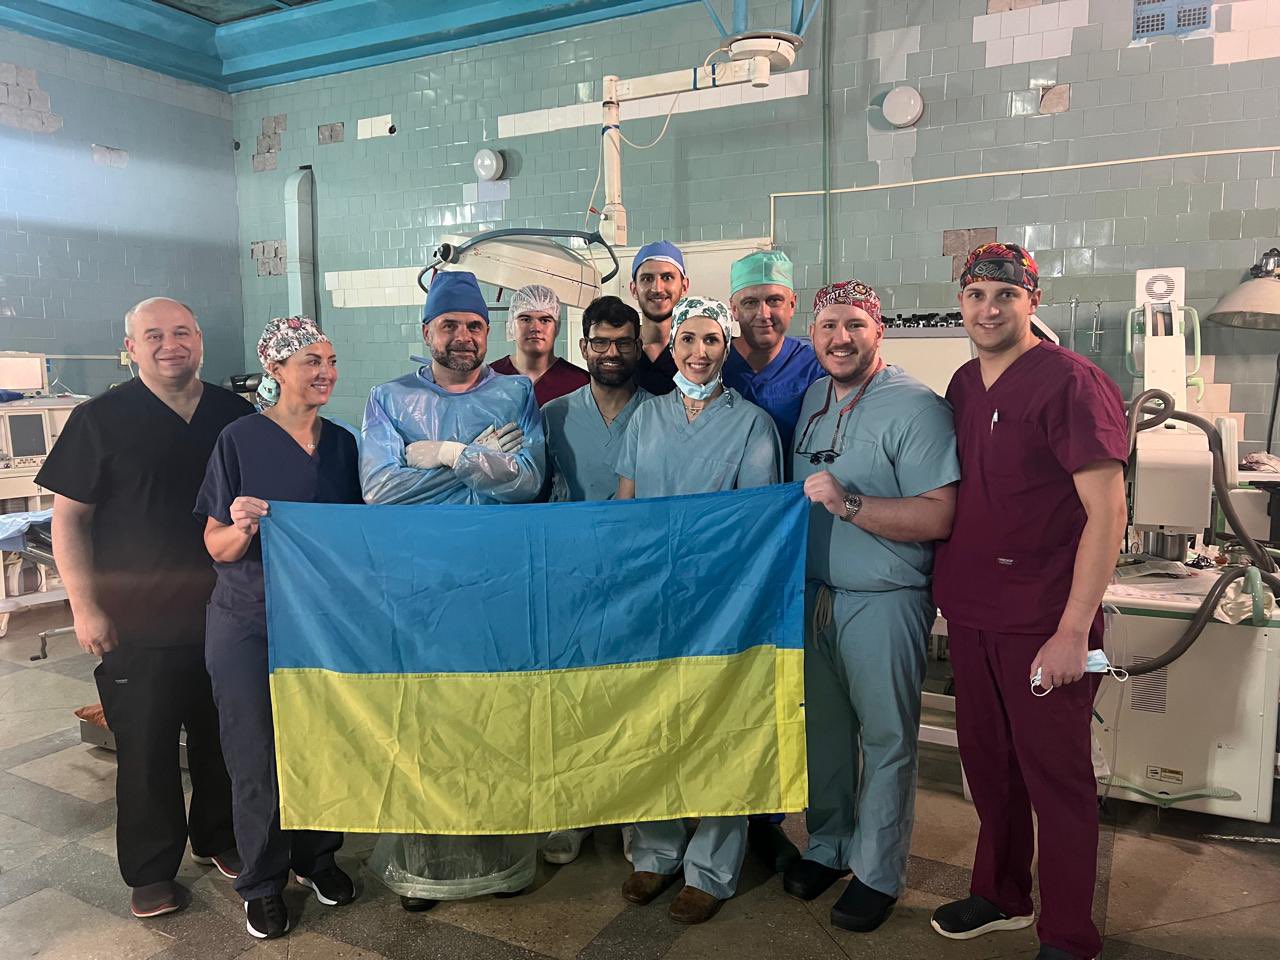 Laura Bukavina: Our 2nd urology surgical mission to Ukraine was a success